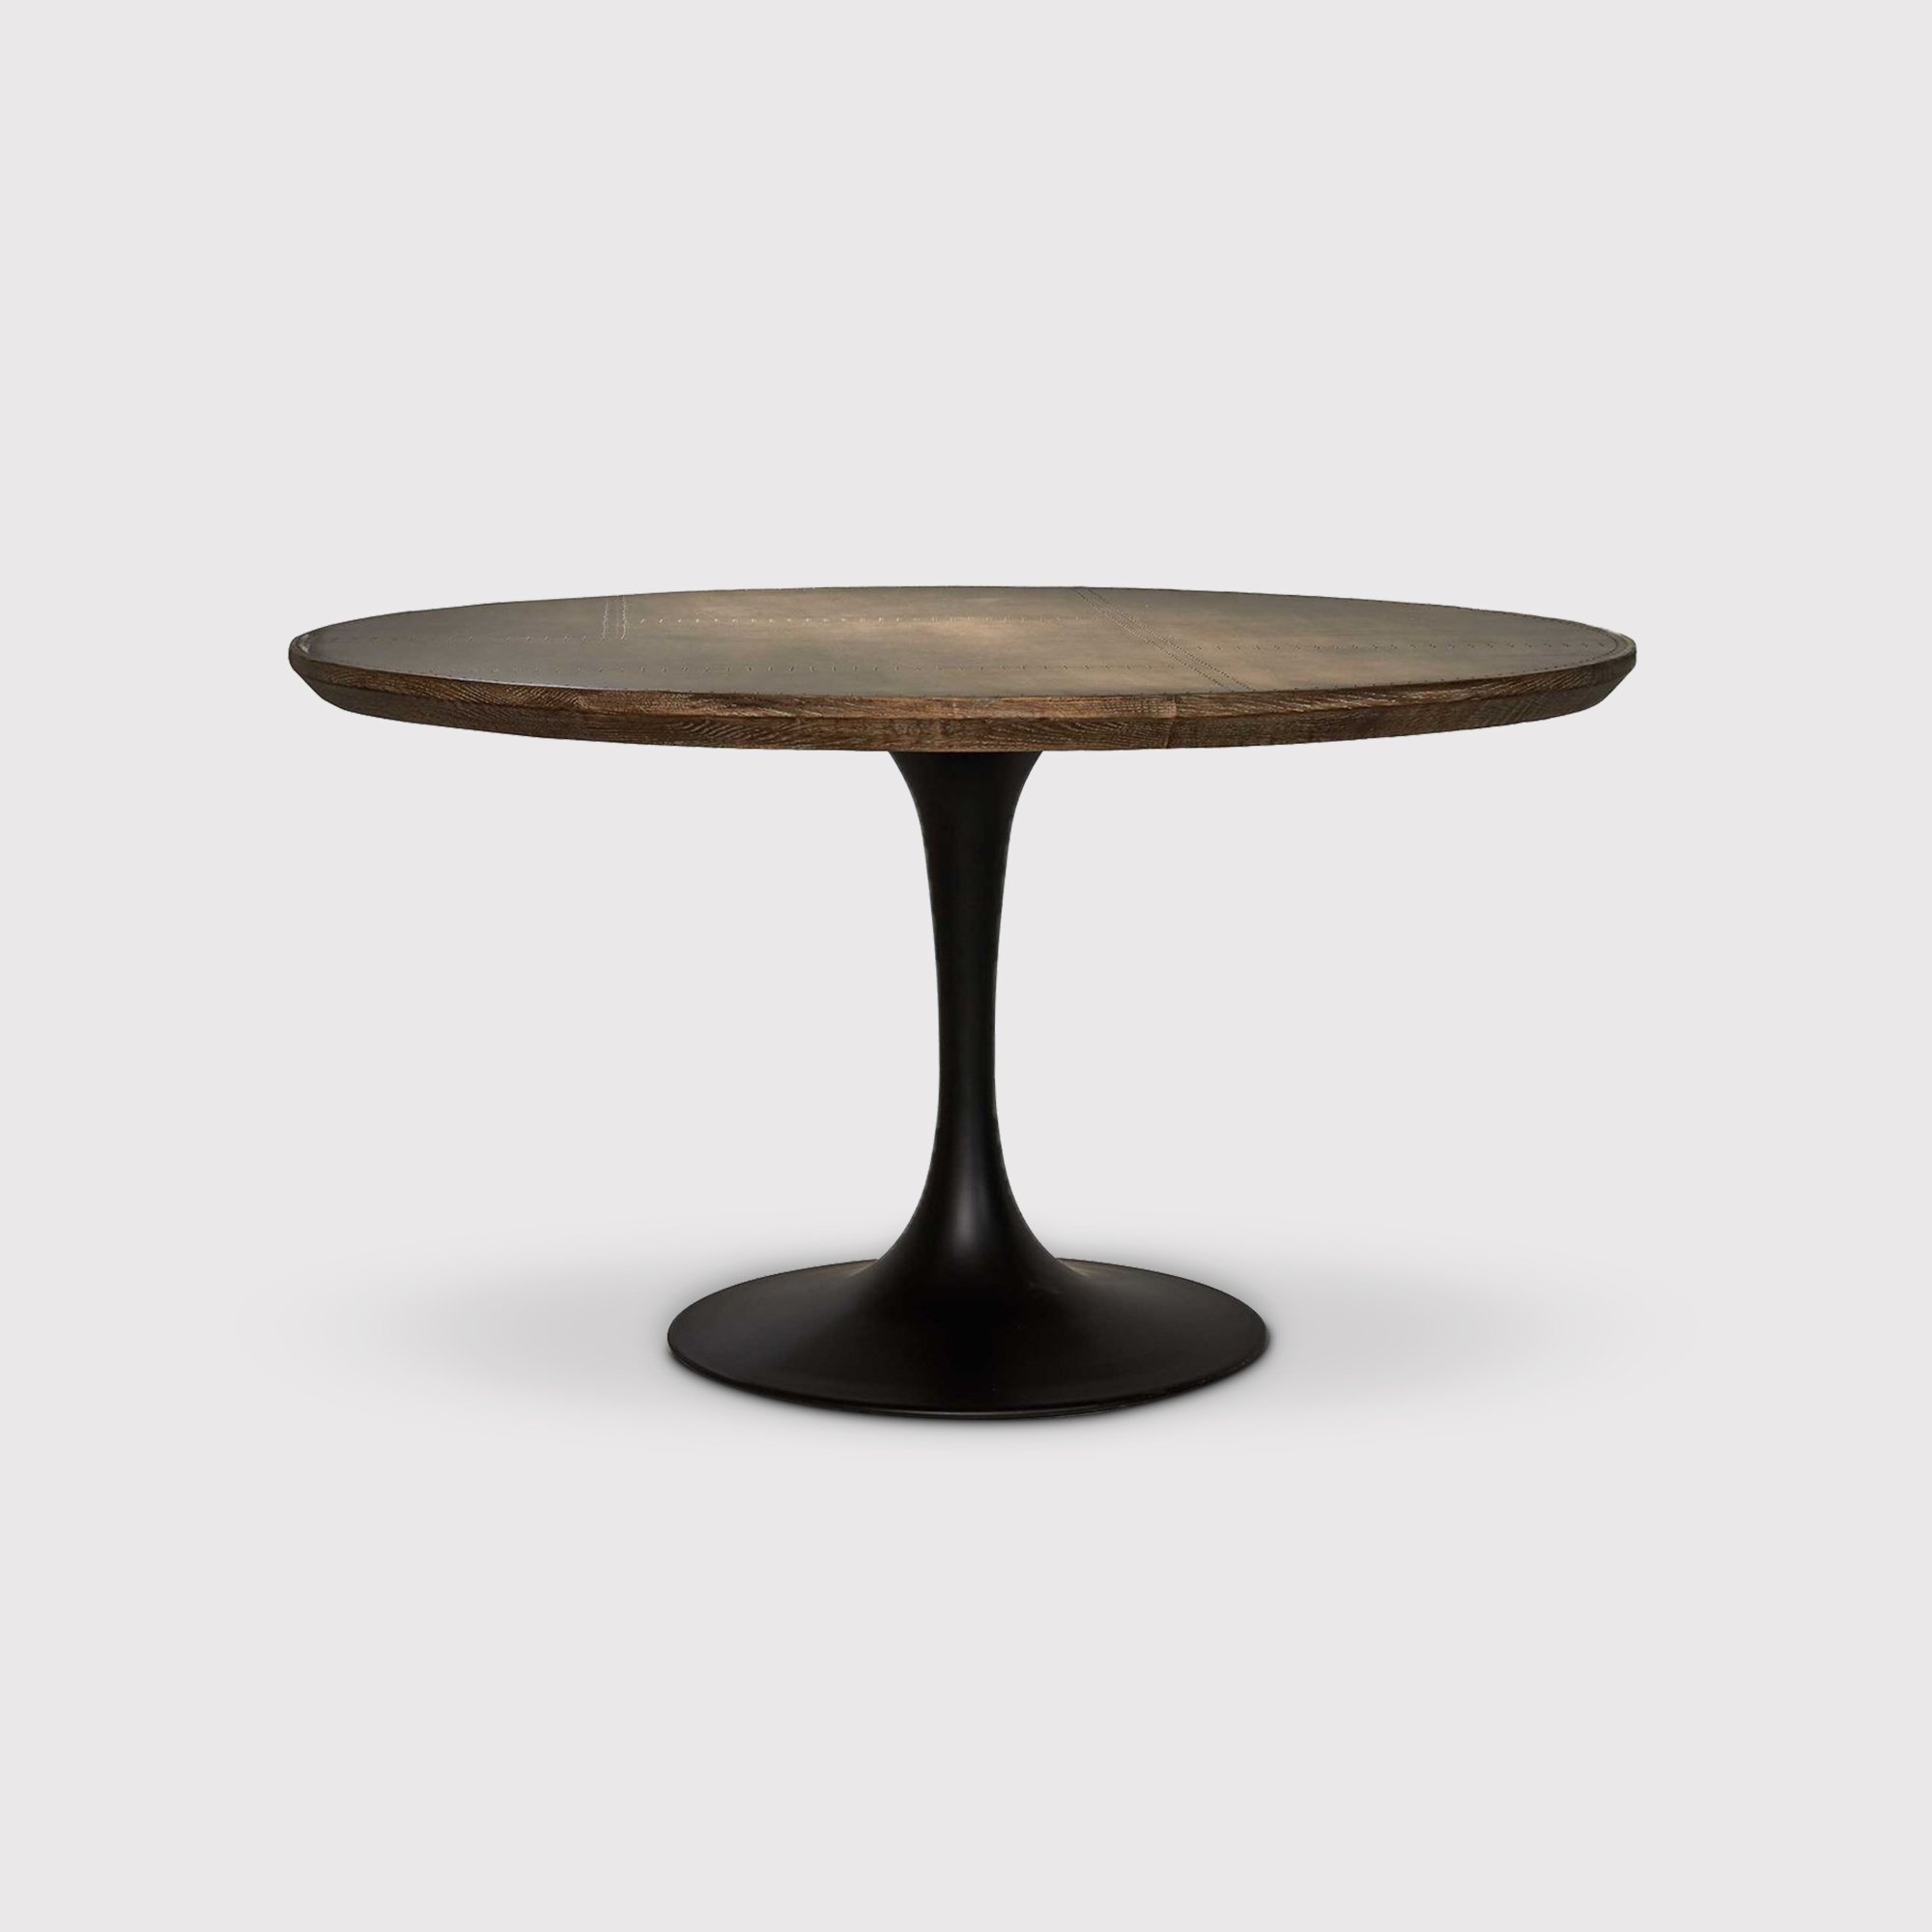 Talula Tulip Dining Table With Brass Top 140x76cm, Brown Metal | Barker & Stonehouse